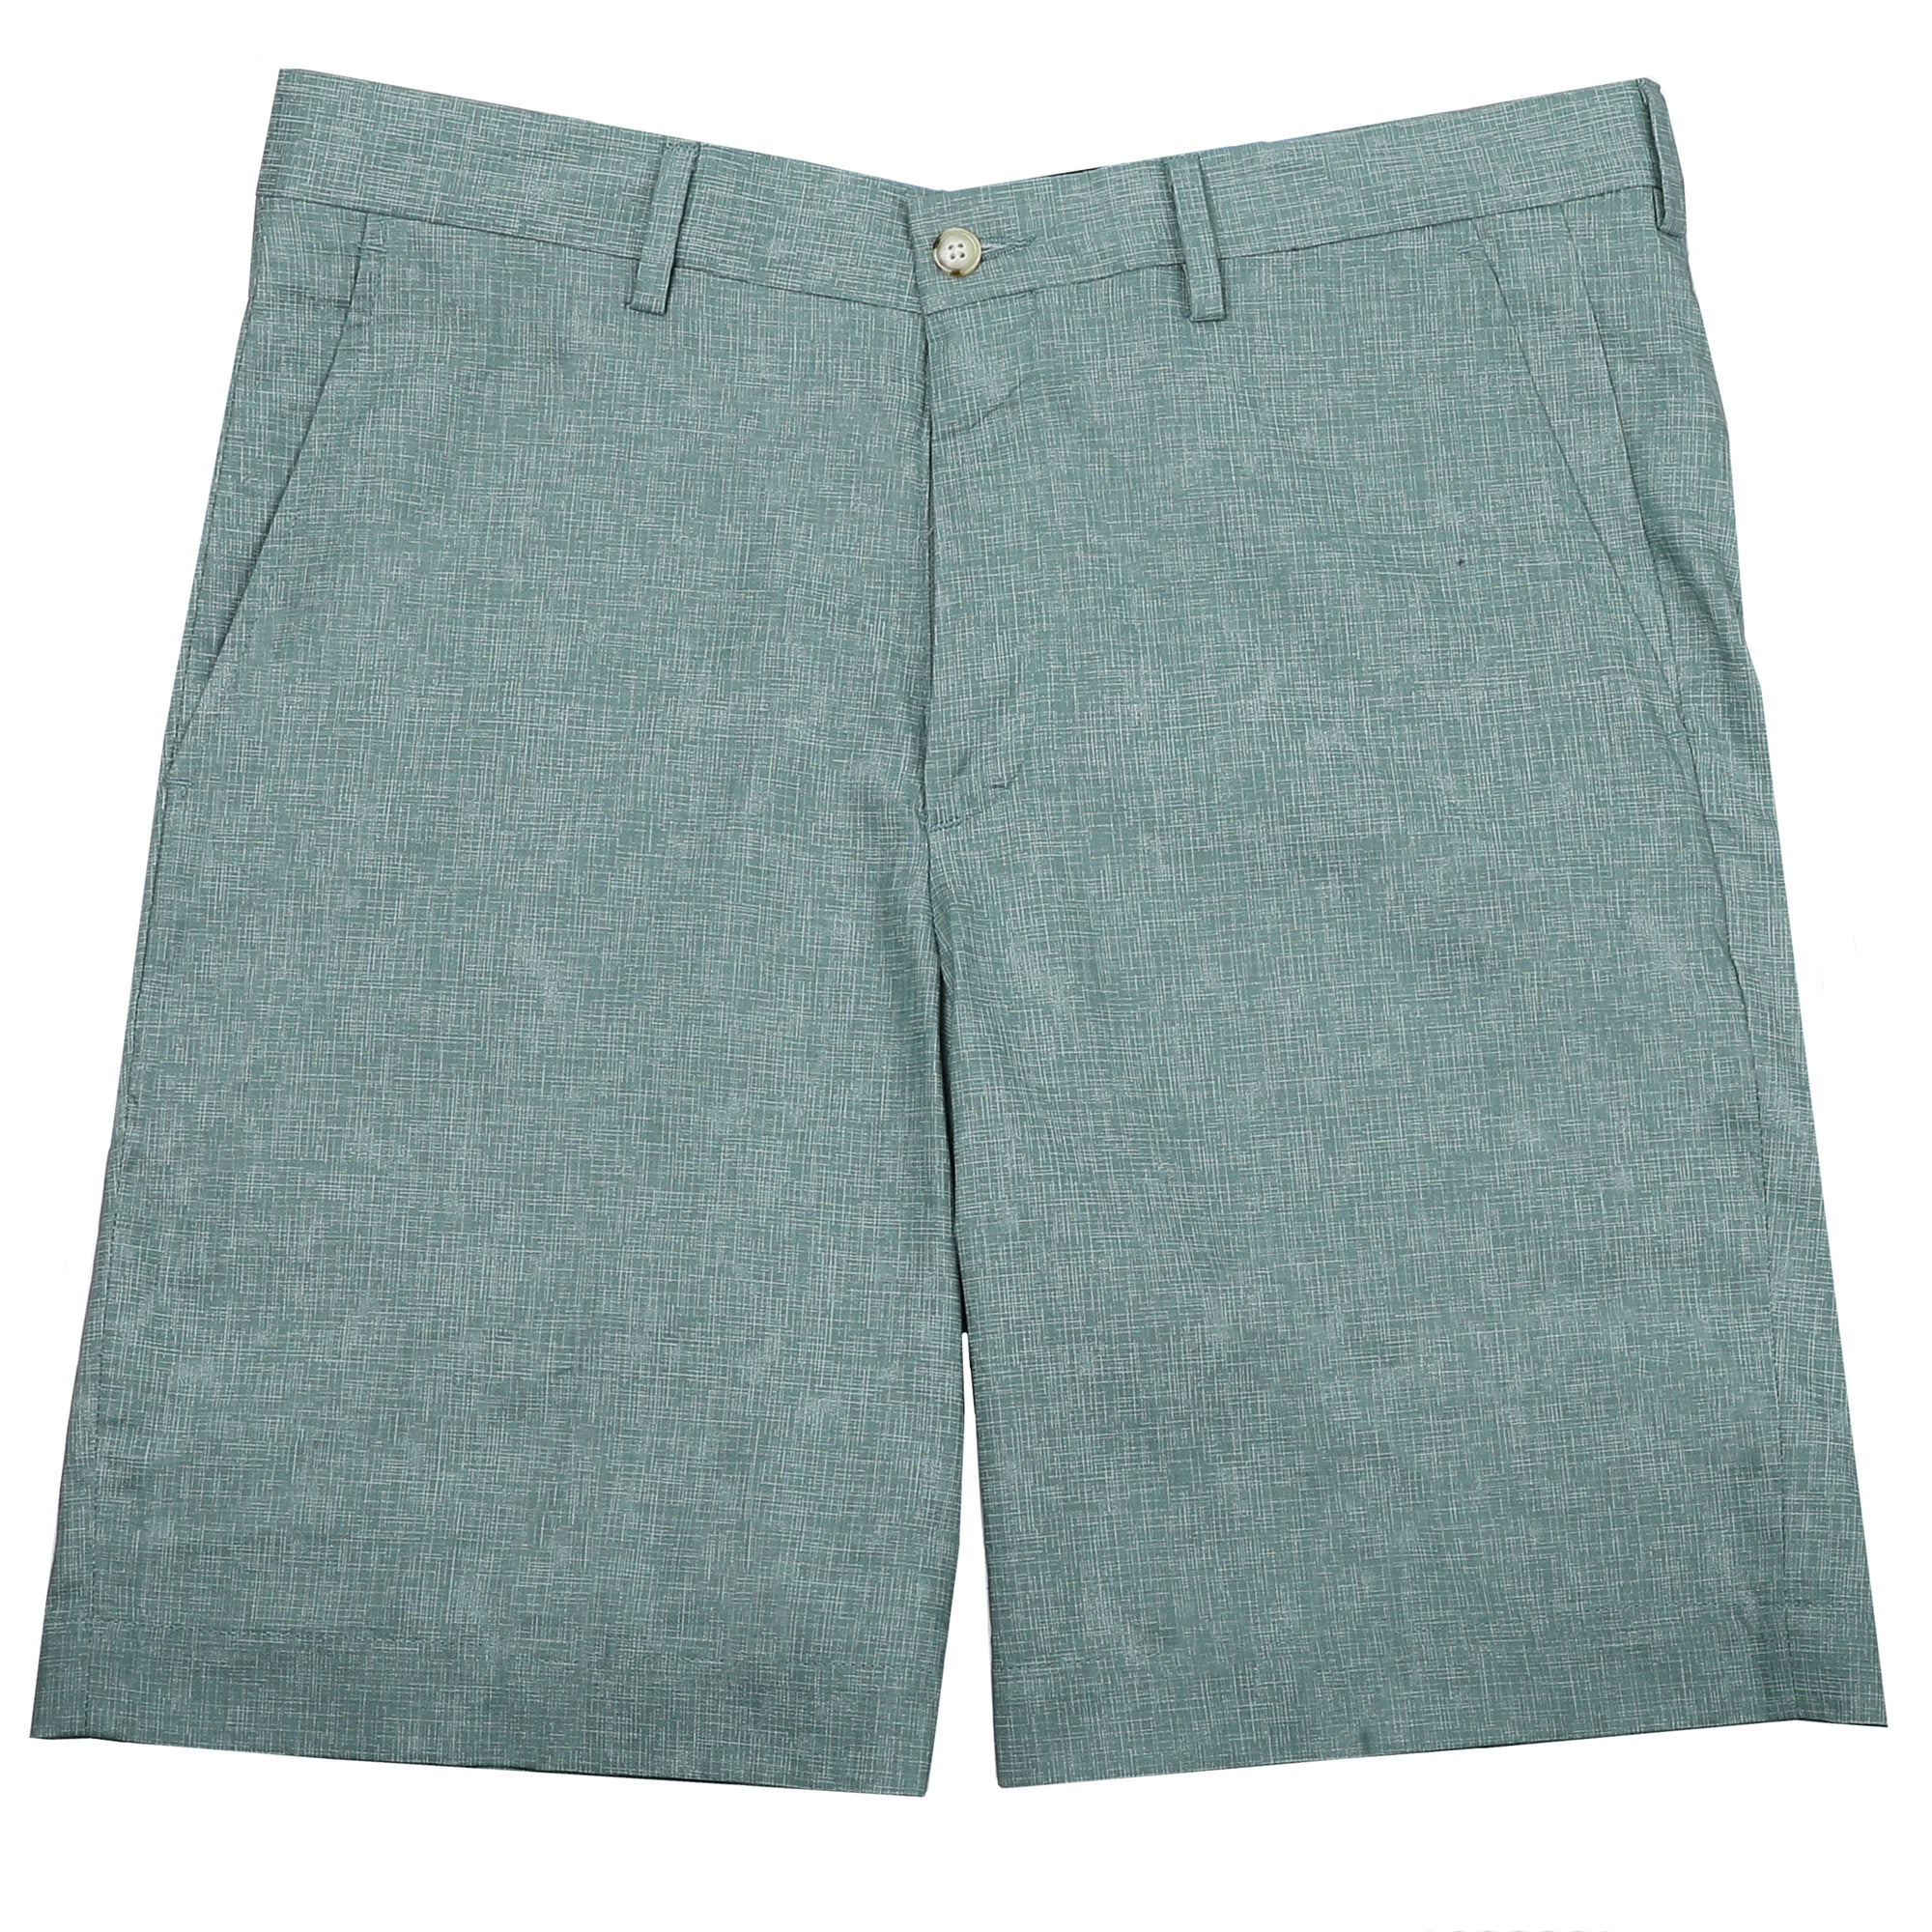 Keep it in neutral with a little intrigue with sage green and subtle crosshatch printed on 100% cotton warm weather ready shorts.  100% Cotton • Traditional Fit • Flat Front • Button Through Closure • Two Front Slash Pockets • 9" Inseam • Machine Washable • Imported 